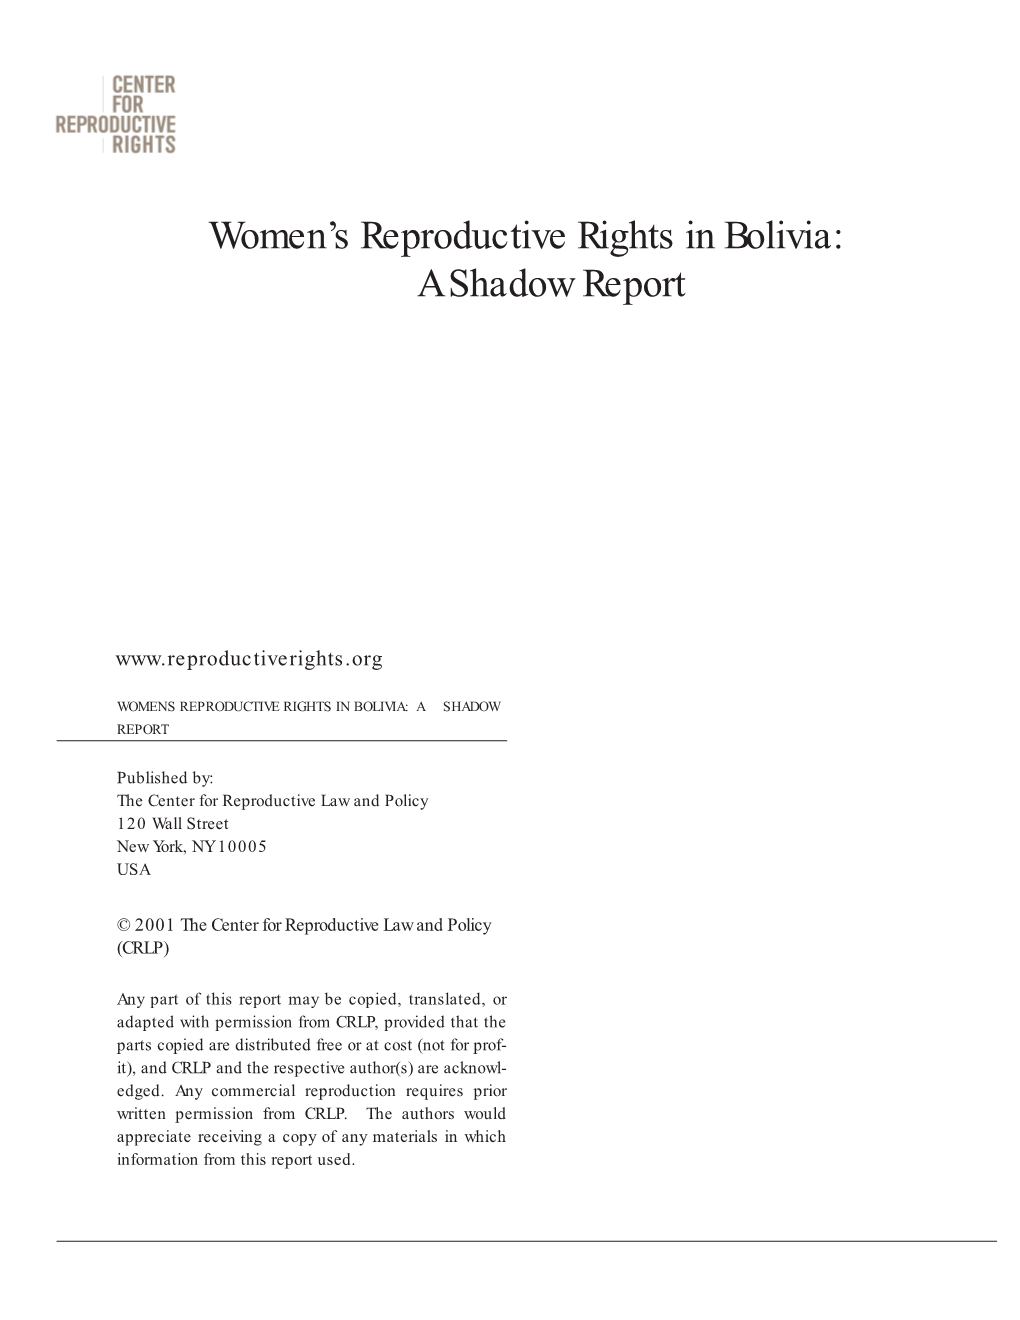 Women's Reproductive Rights in Bolivia